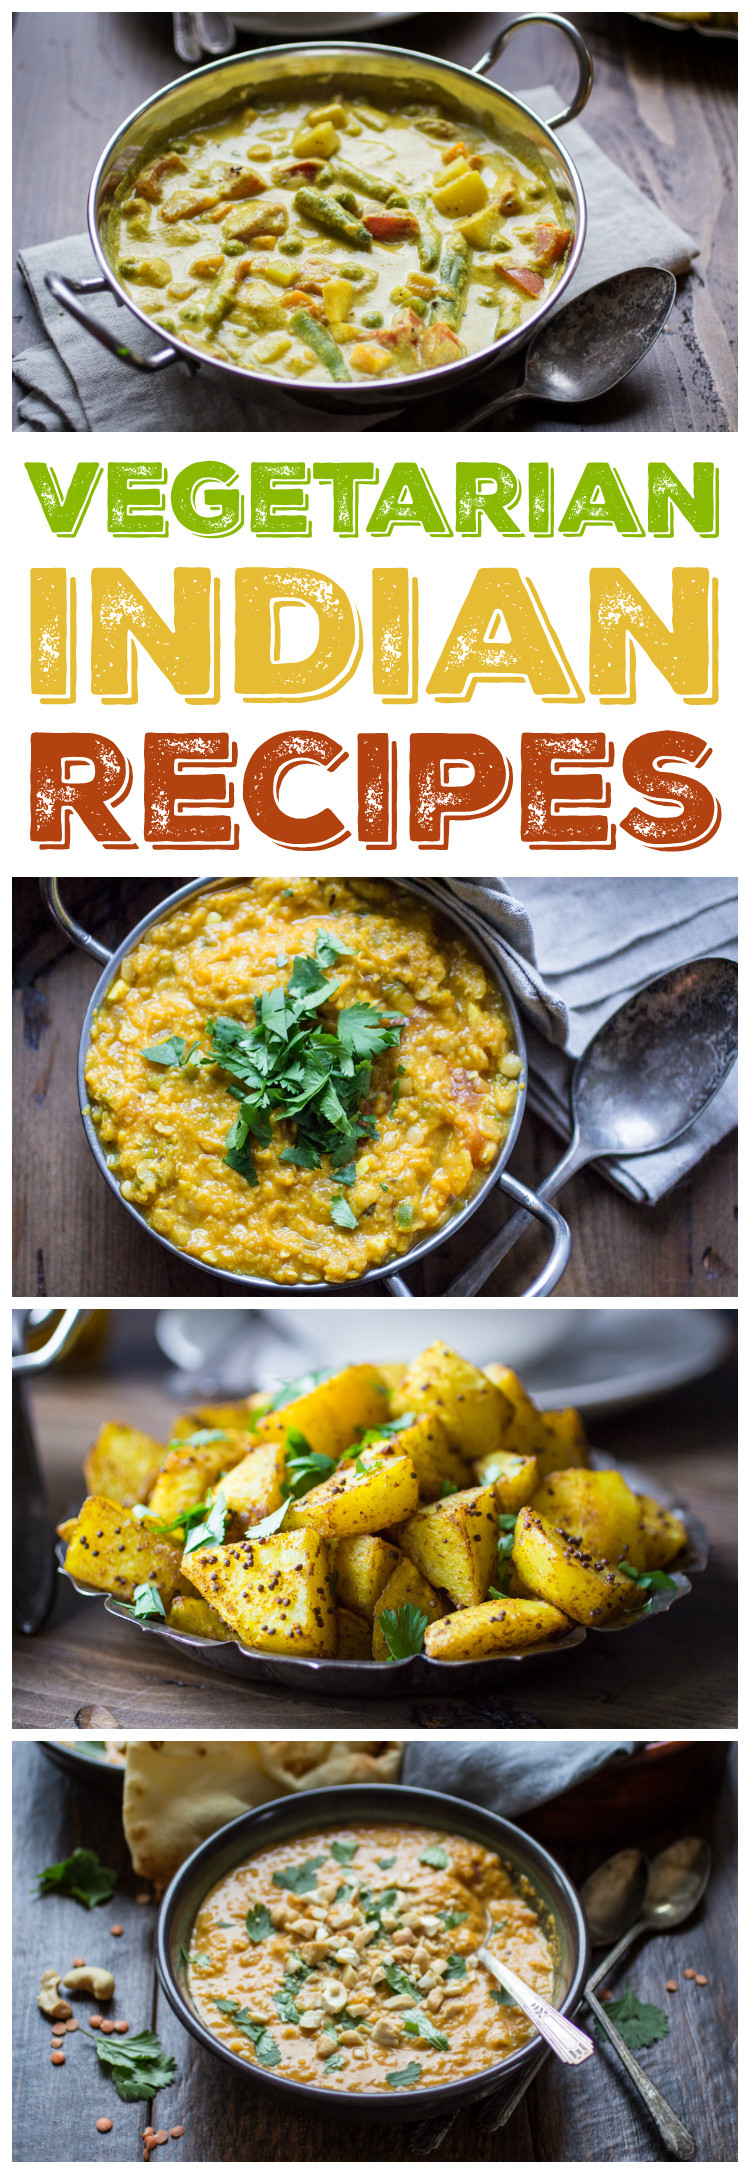 Top Rated Vegetarian Recipes
 10 Ve arian Indian Recipes to Make Again and Again The